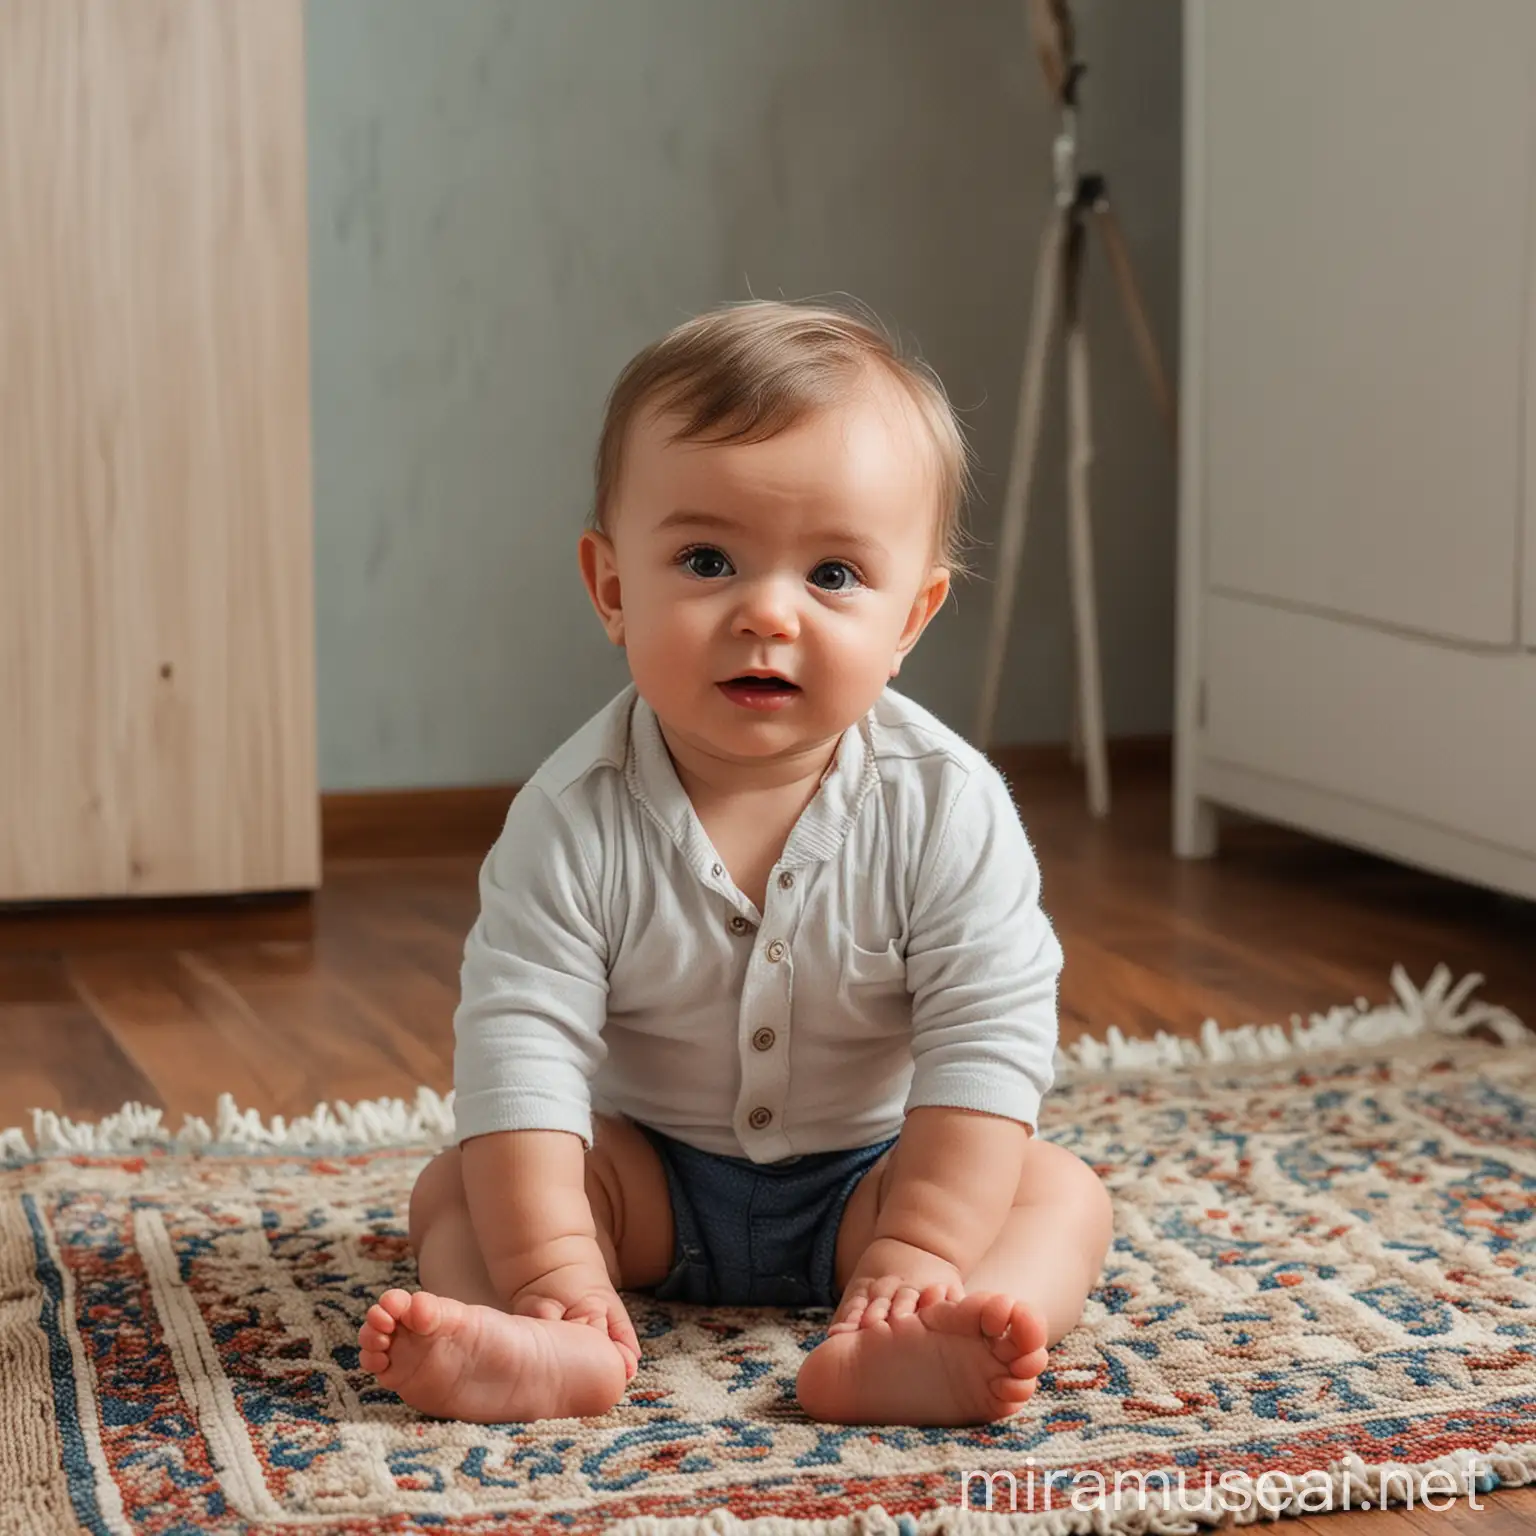 there is a baby sitting on a rug in a room, cute boy, mid shot portrait, portrait image, high quality portrait, full body photograph, portrait picture, photo portrait, classic portrait, portrait full body, photoshoot portrait, portrait shot, medium portrait, mateus 9 5, photoshoot, mid portrait, home photography portrait, cuteness, full body photoshoot
